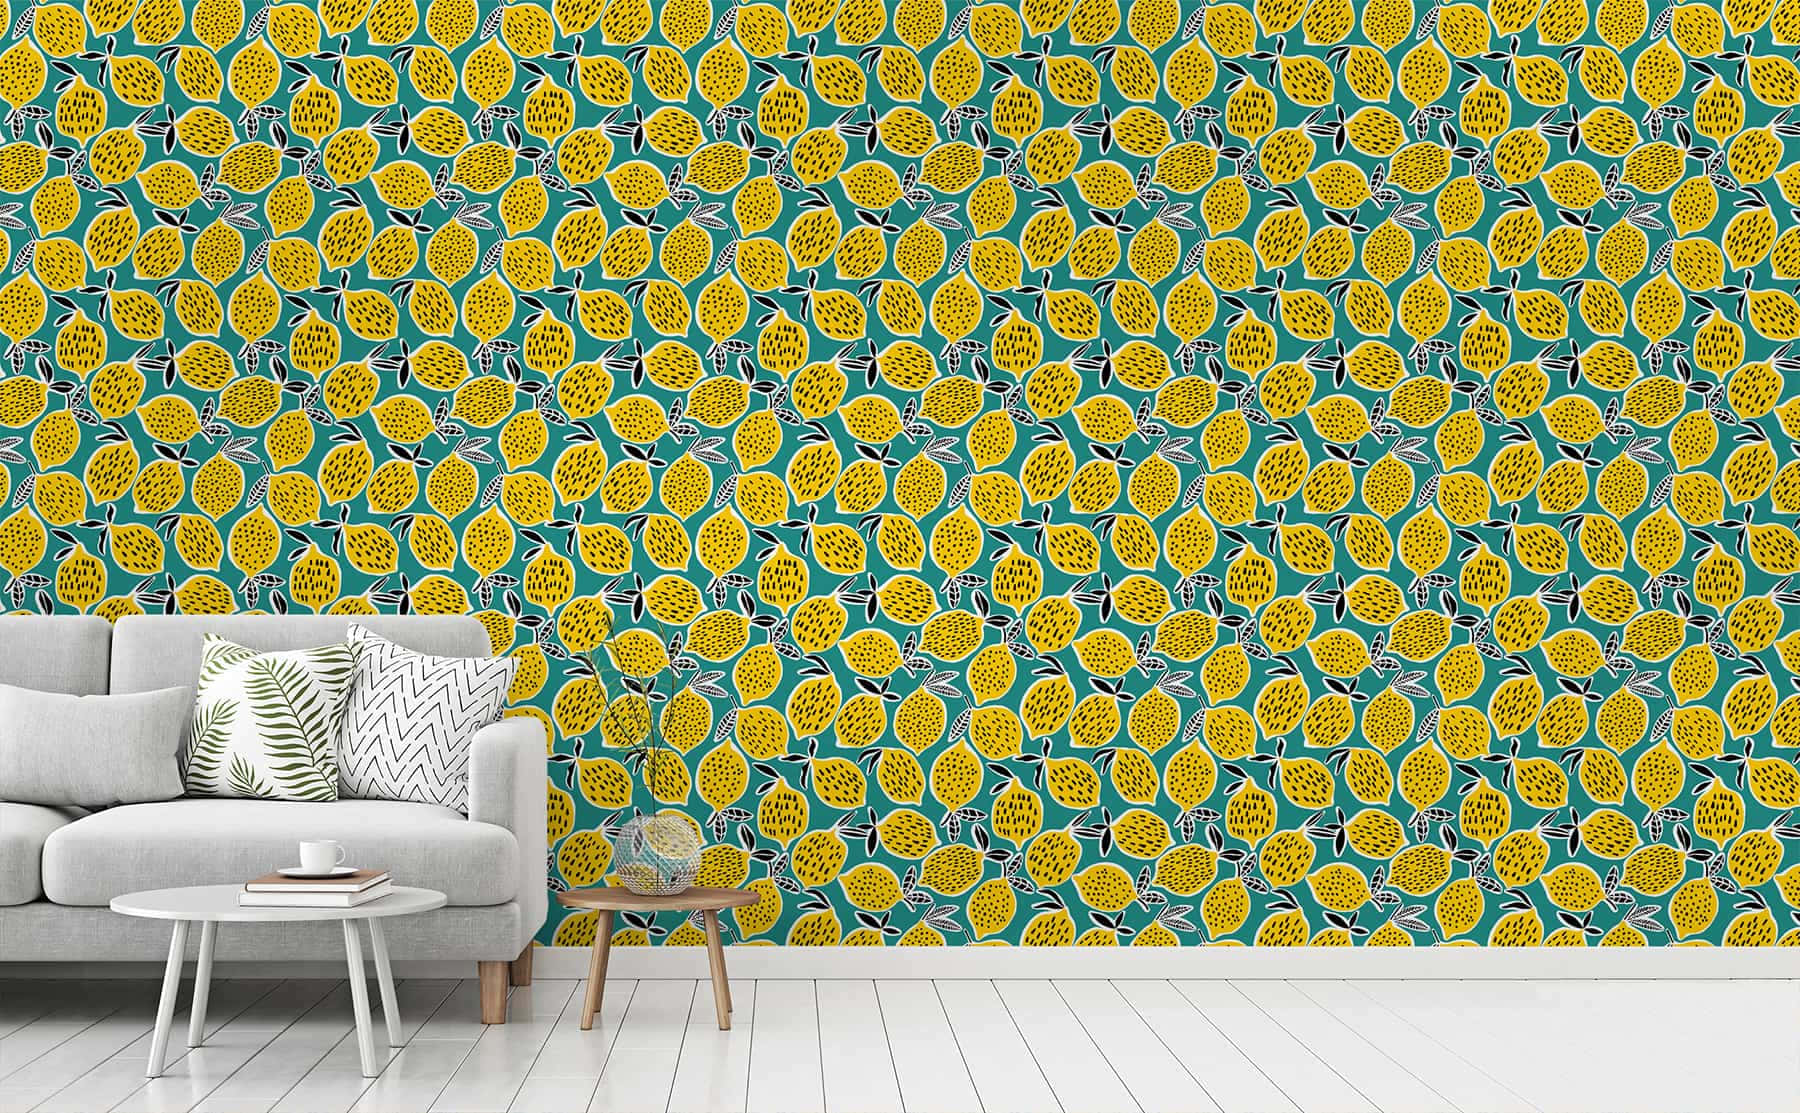 Zesty Yellow and Green Wall Accent Wallpaper